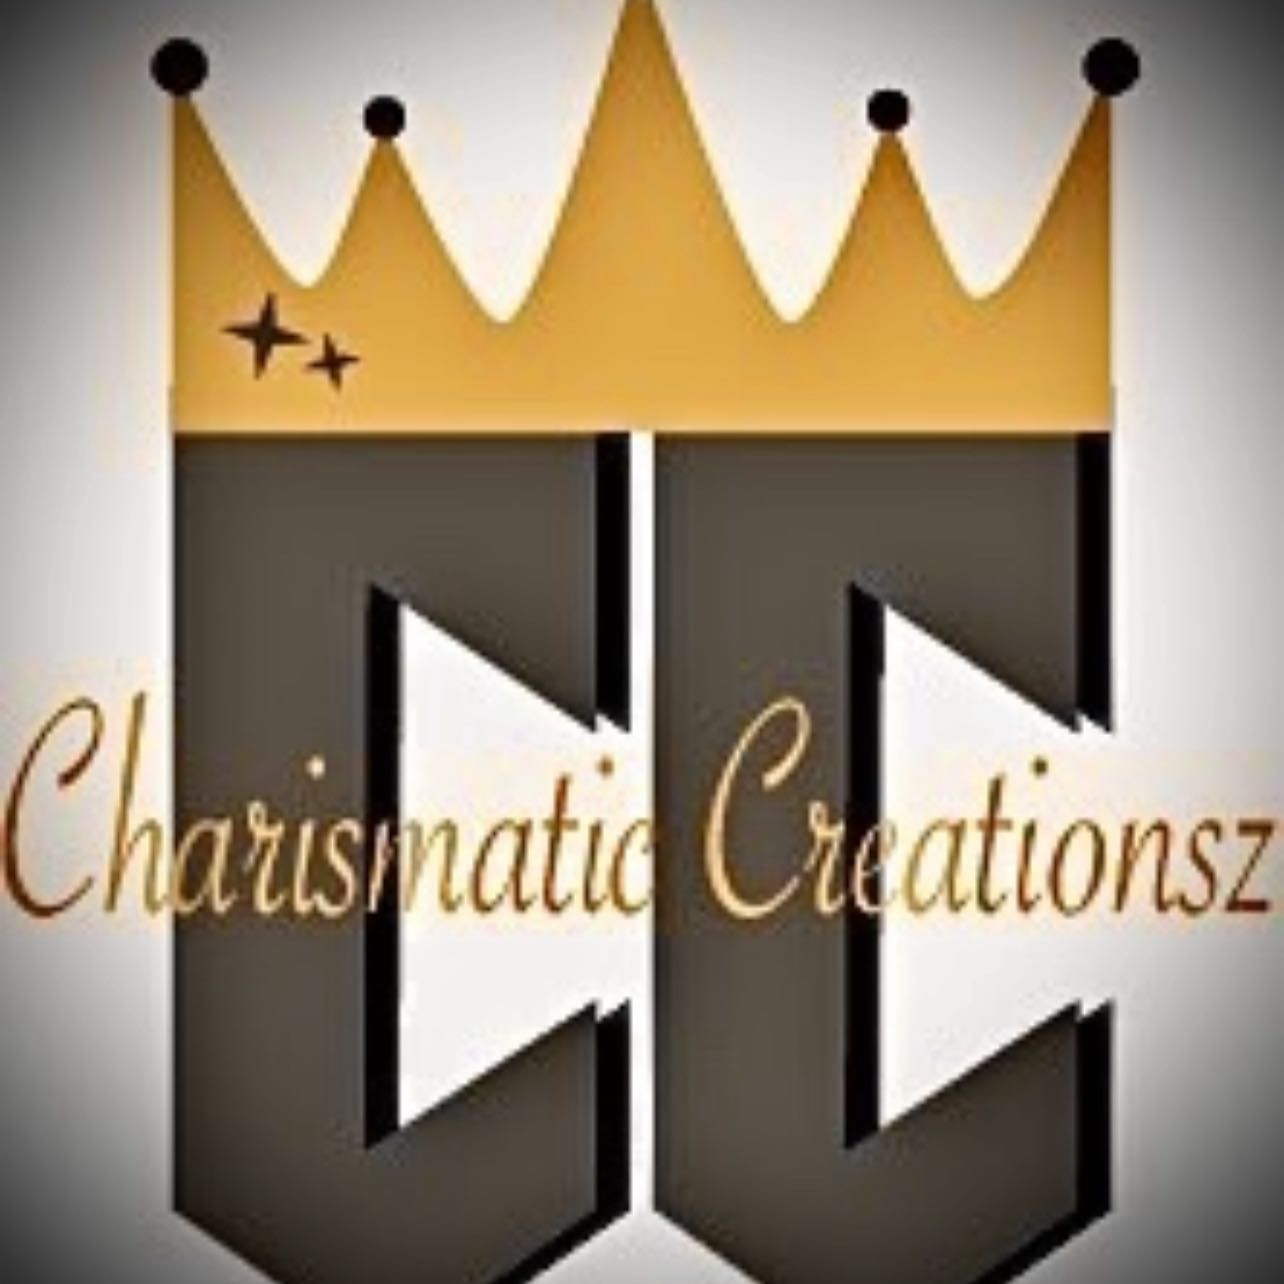 Charismatic Creationsz, Address available upon confirmed appointment, Las Vegas, 89106